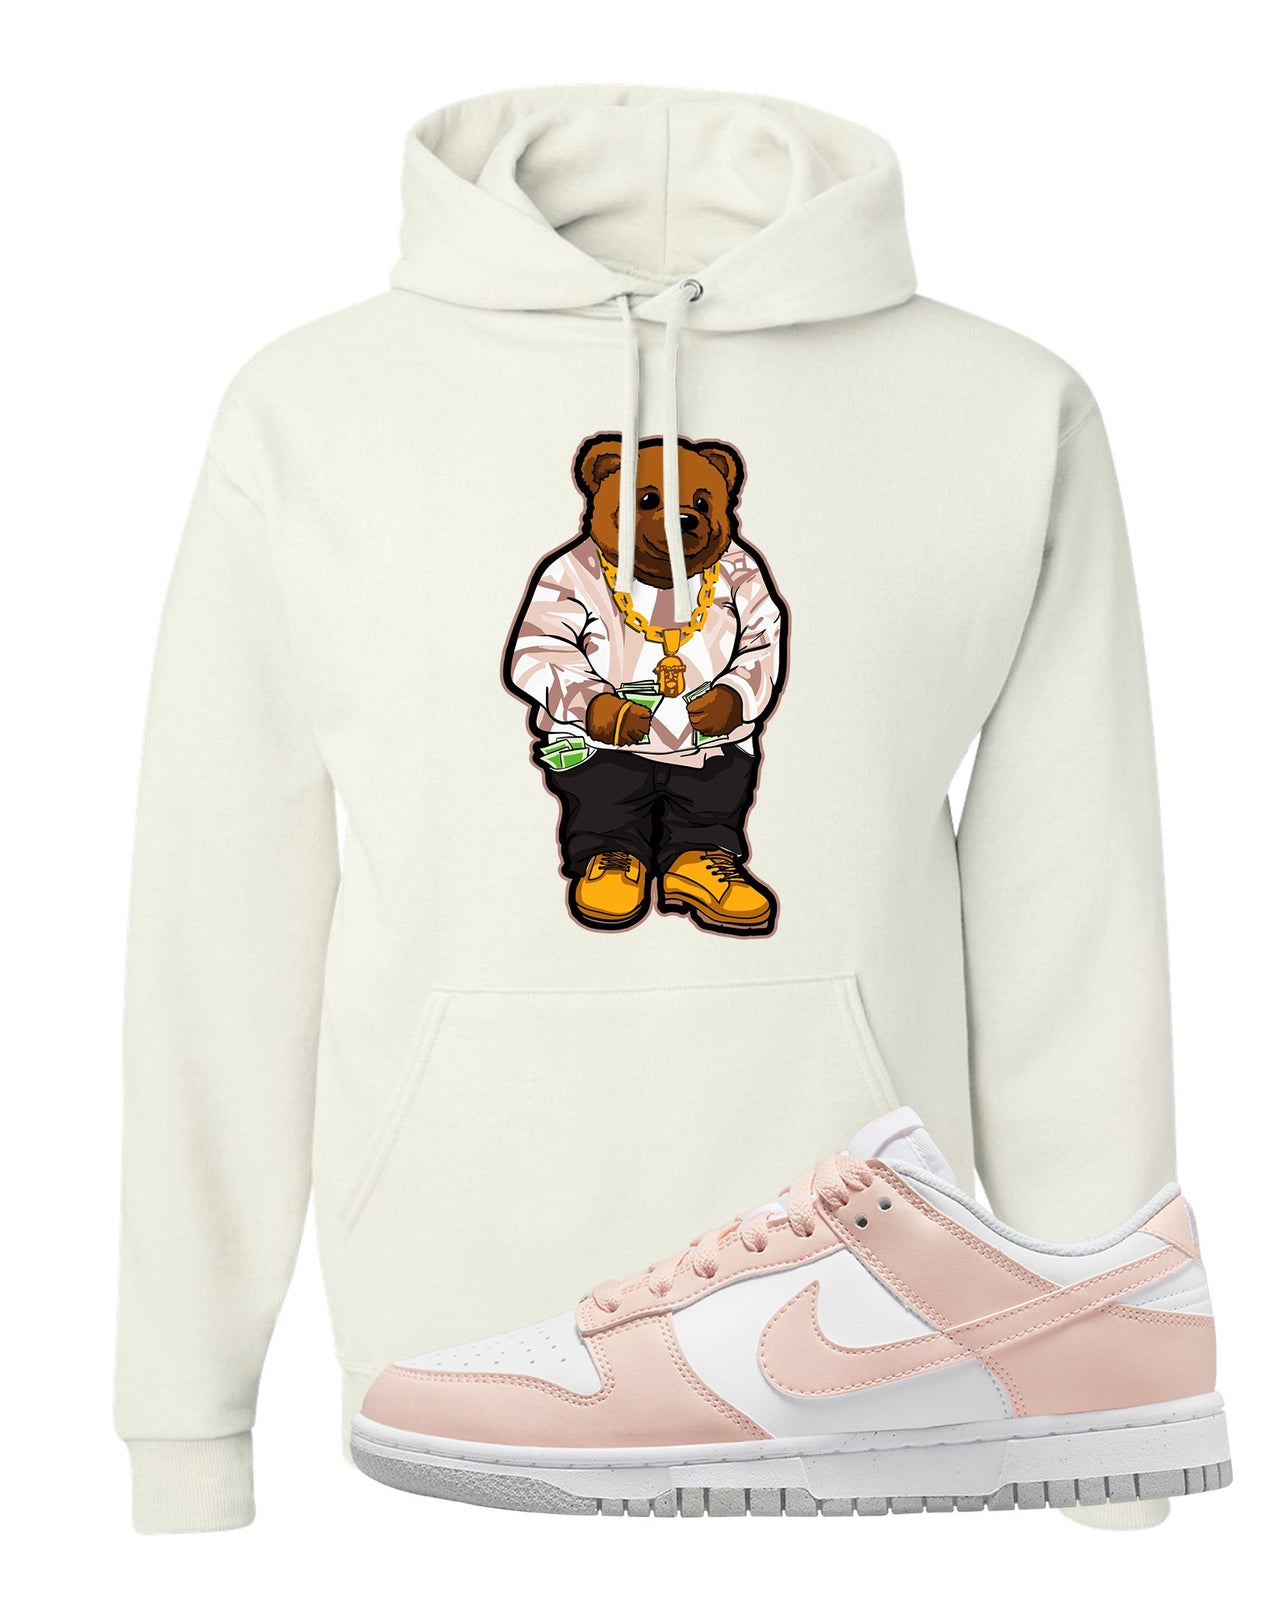 Next Nature Pale Citrus Low Dunks Hoodie | Sweater Bear, White